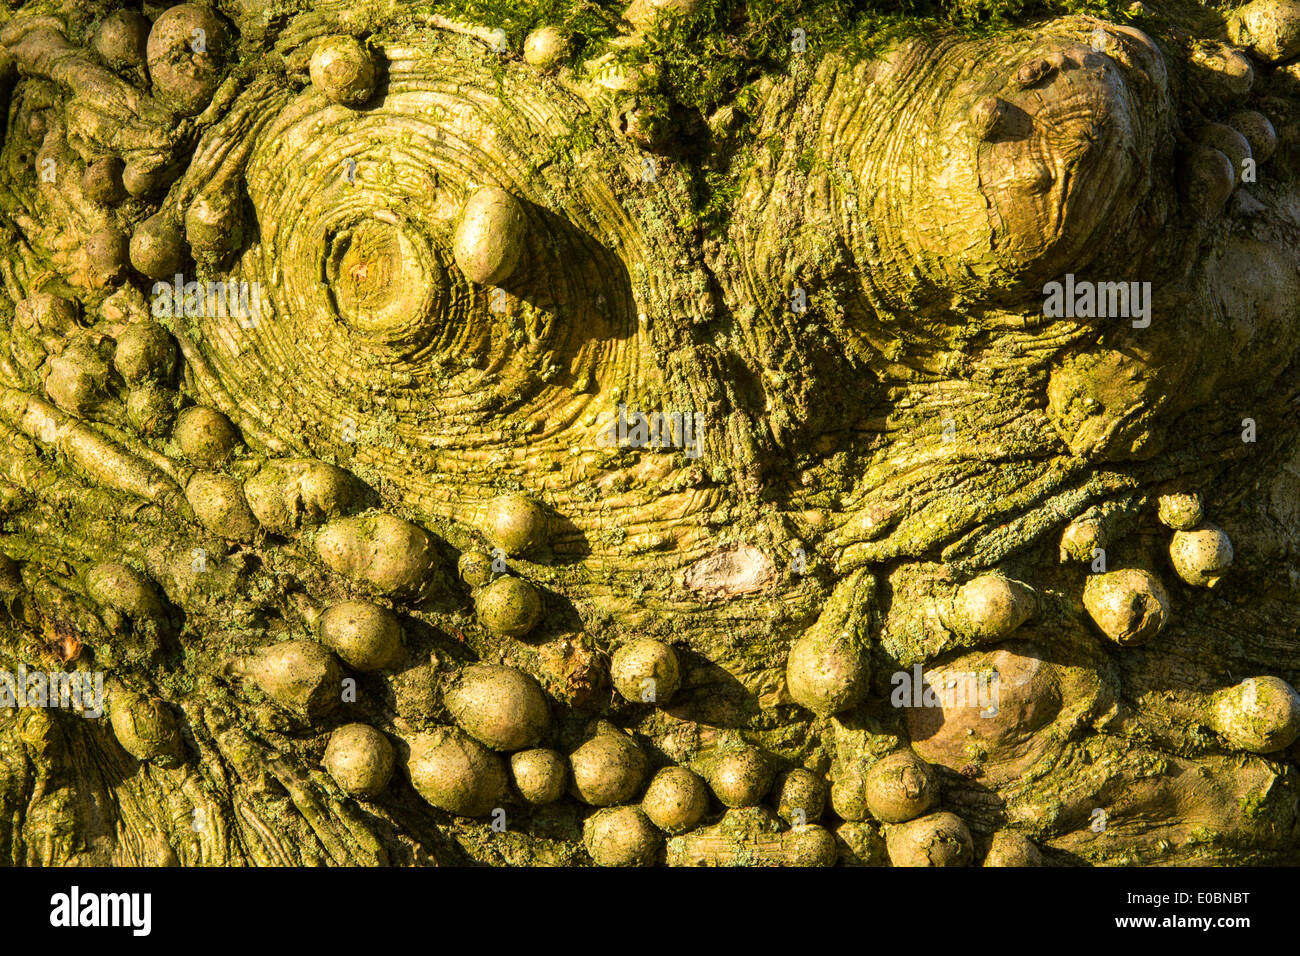 Knobbly growths on a Holly tree trunk in Holehird Gardens, Windermere, Cumbria, UK. Stock Photo